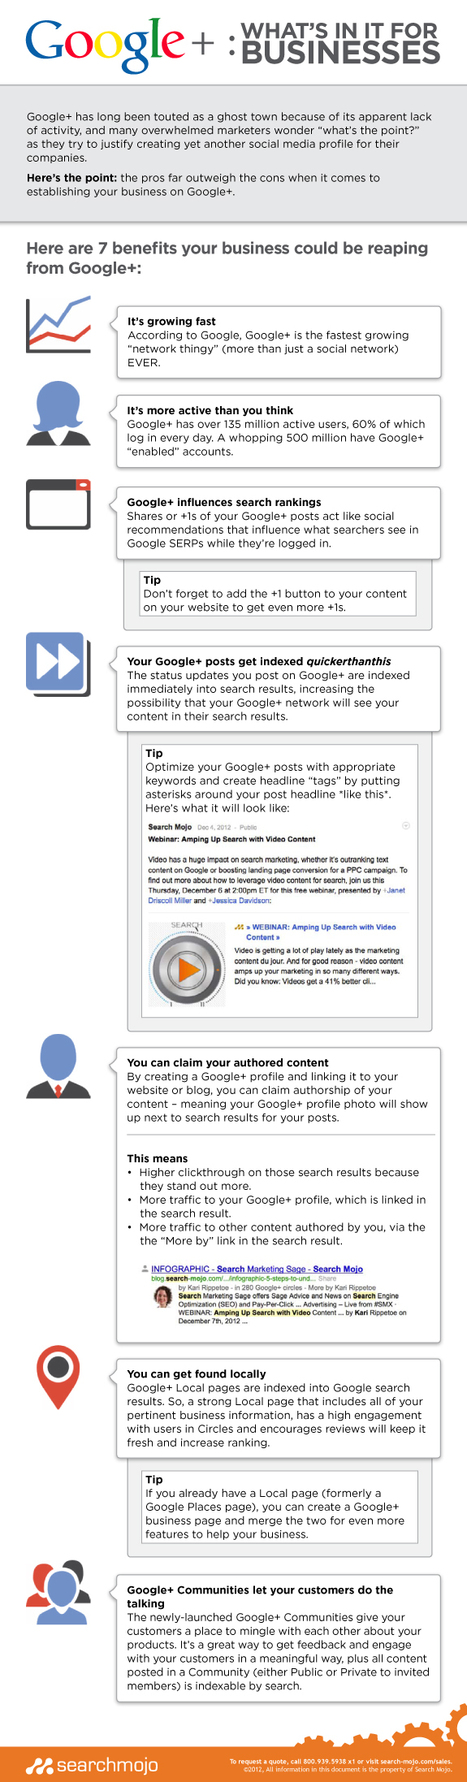 Benefits of Google+ for Business Infographic | Search Mojo | Technology in Business Today | Scoop.it